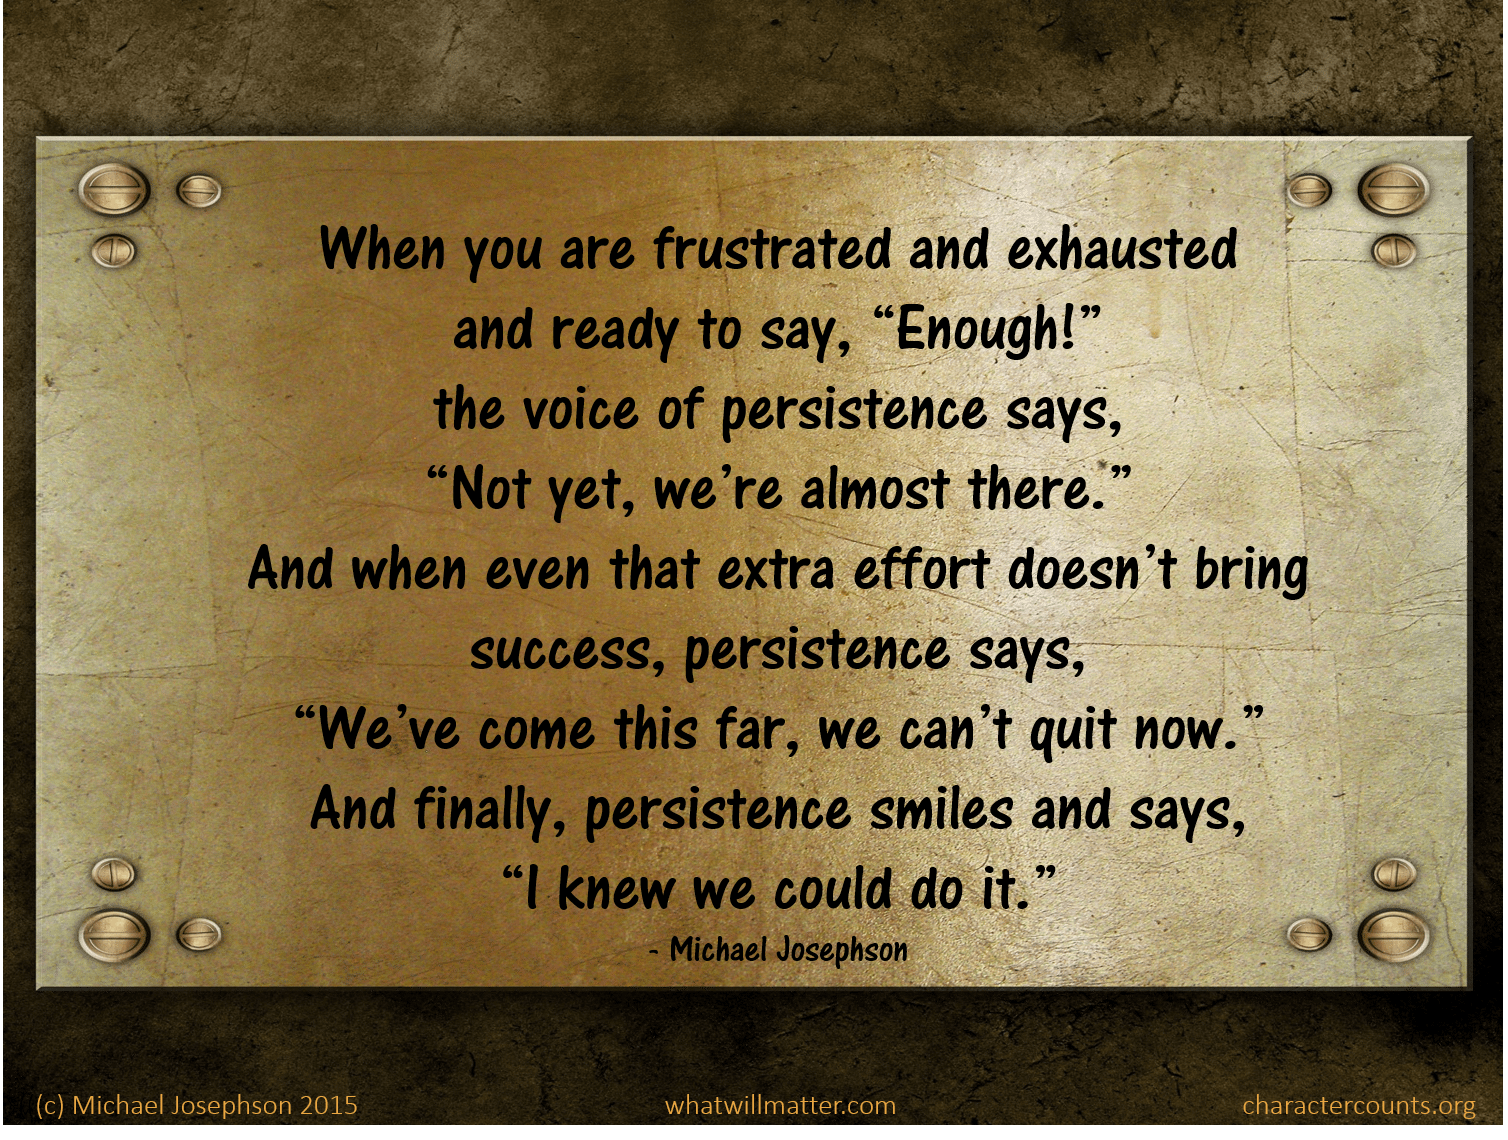 When you are frustrated and exhausted and ready to say 'enough!' the voice of persistence says, 'Not yet, we're almost there.... Michael Josephson